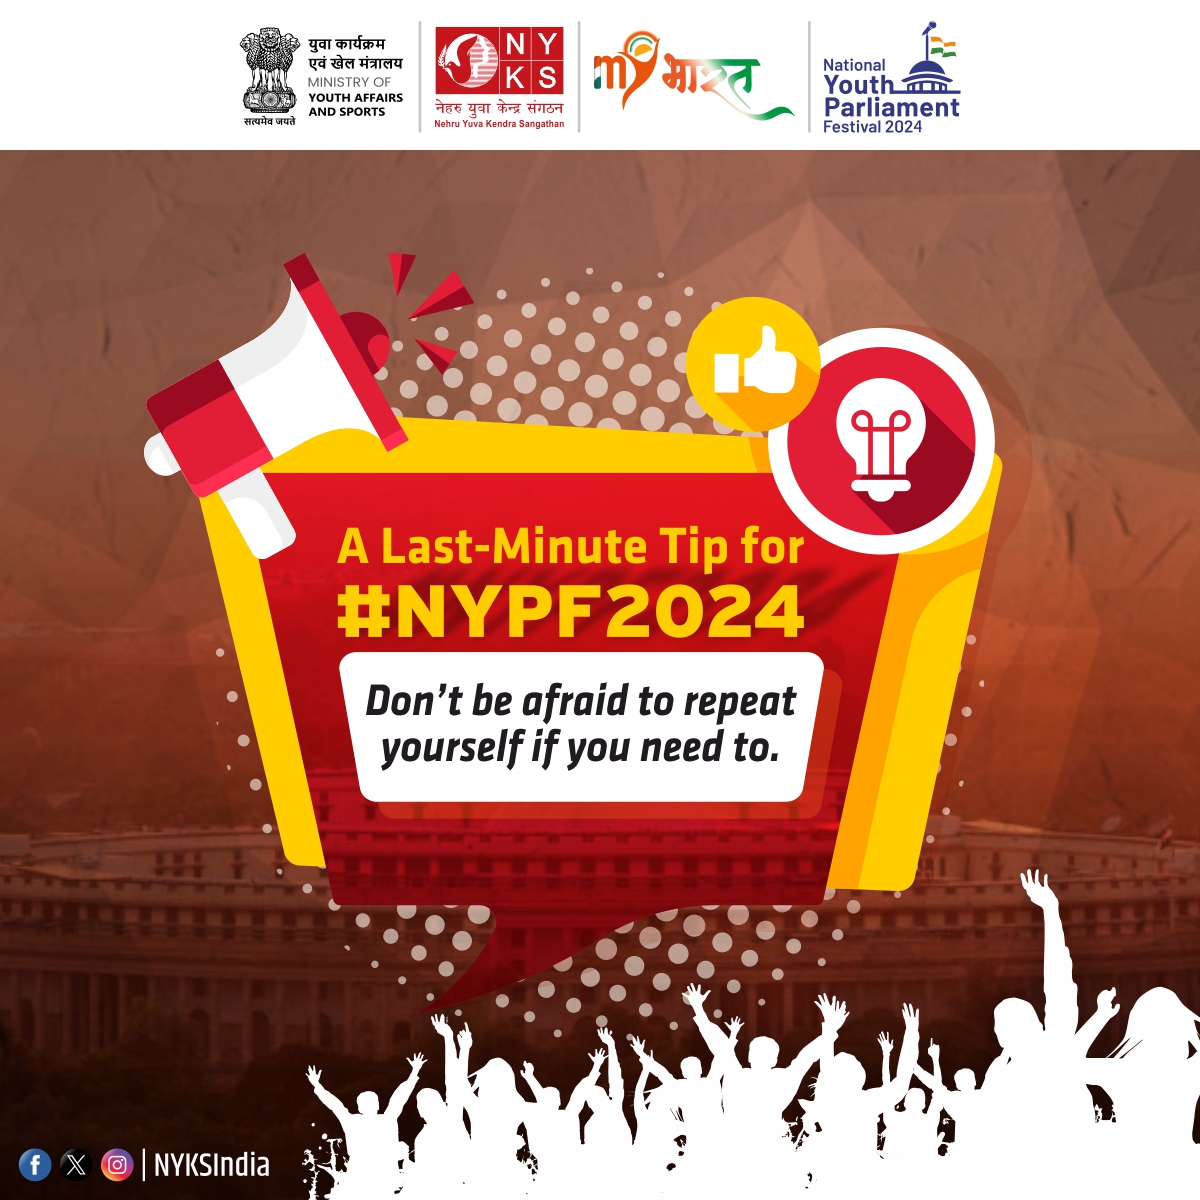 🚀 Last-minute tip for NYPF 2024: Don't hesitate to repeat yourself if necessary. Repetition reinforces your message and ensures clarity! 💡 #NYPF2024 #YouthEmpowerment #NYPFTips